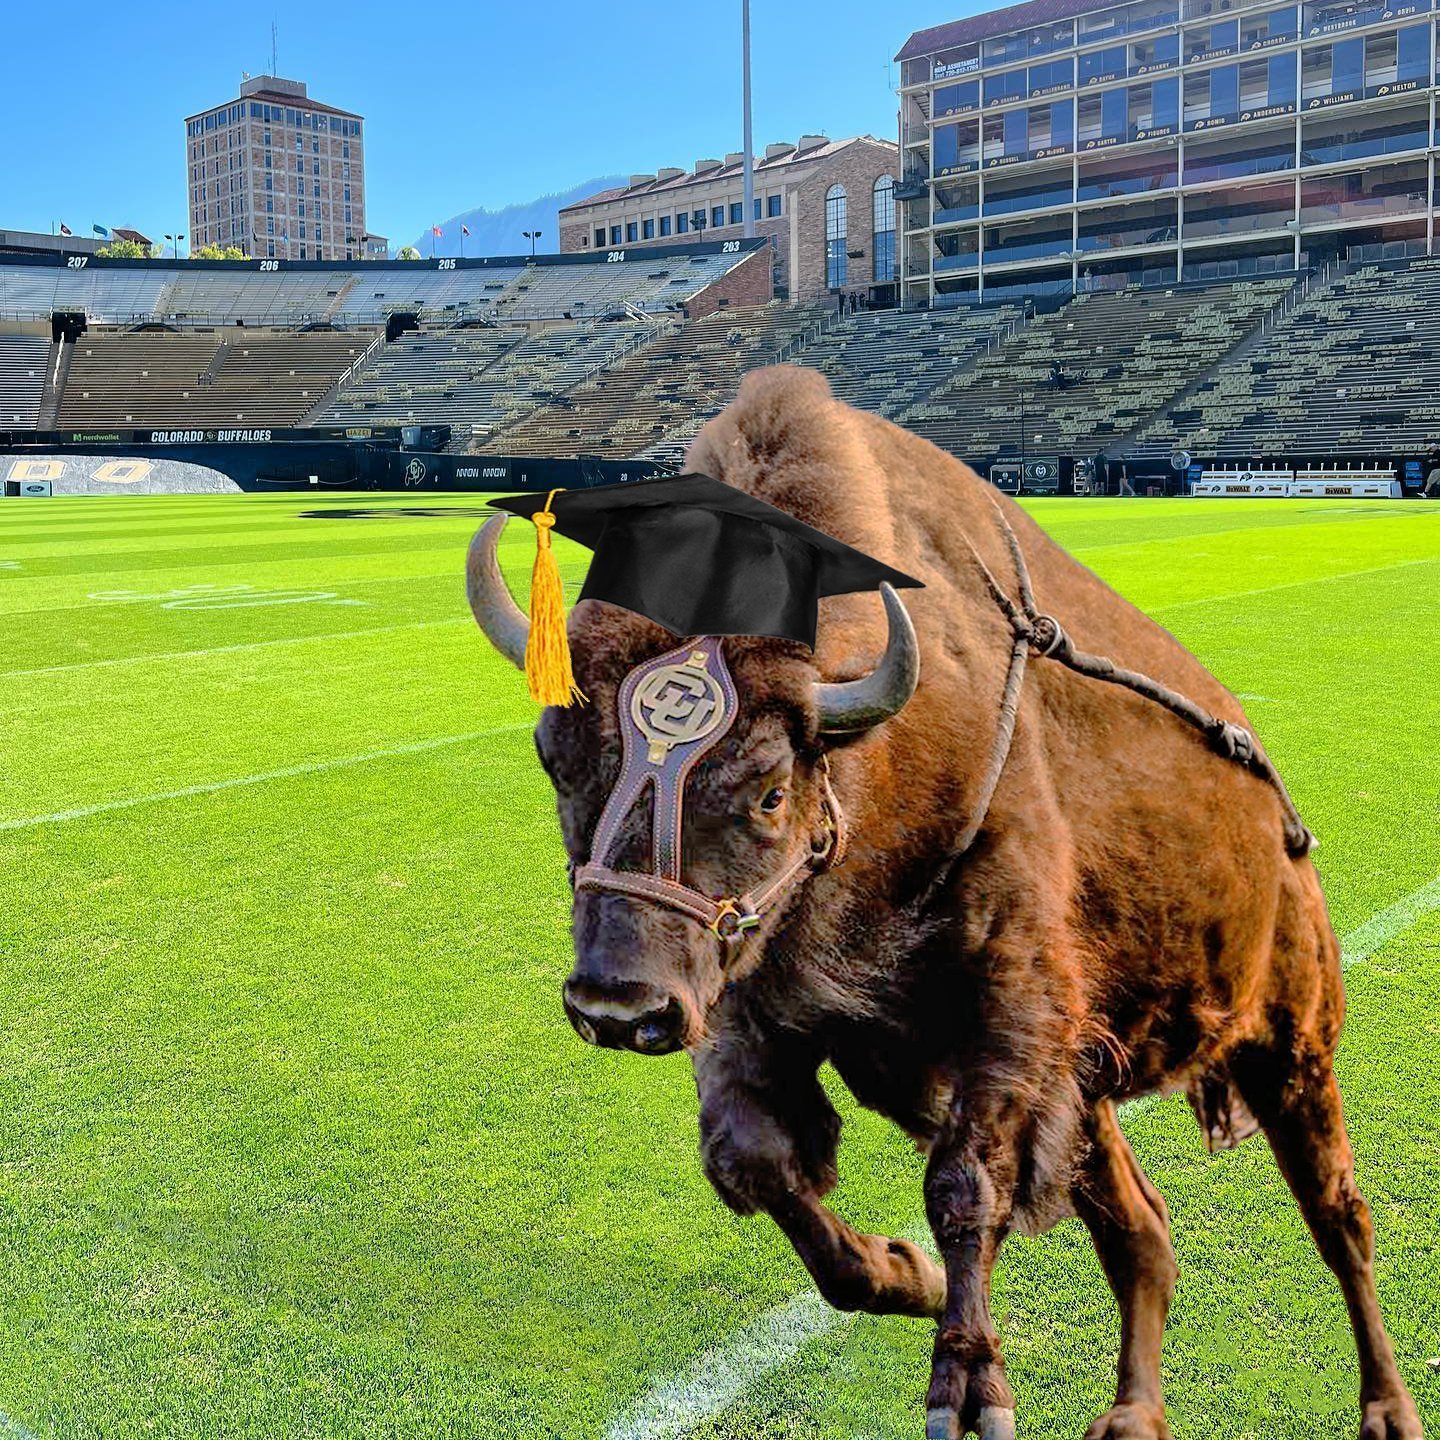 Congratulations to the CU Boulder class of 2024 🖤💛

It&rsquo;s time to charge your future, stampede your dreams, and let your Buffs light shine on this next exciting chapter! But first, a well deserved weekend of rest, commemoration, and perhaps ev